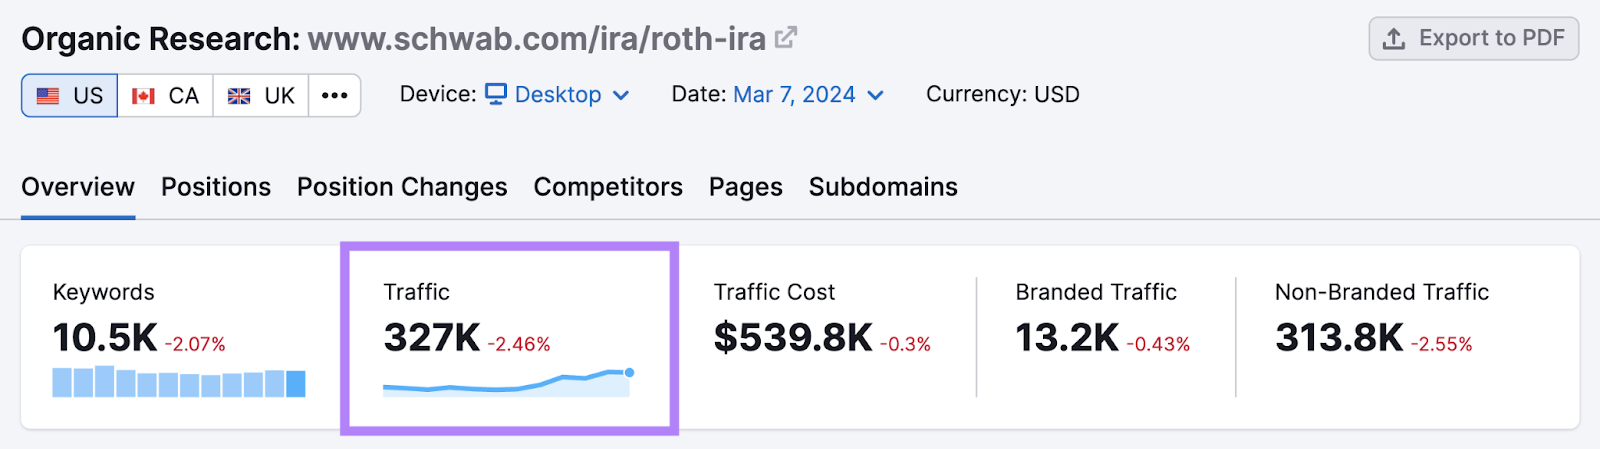 Charles Schwab's landing page targeting the keyword “Roth IRA" gets around 327K monthly visitors, according to Organic Research tool